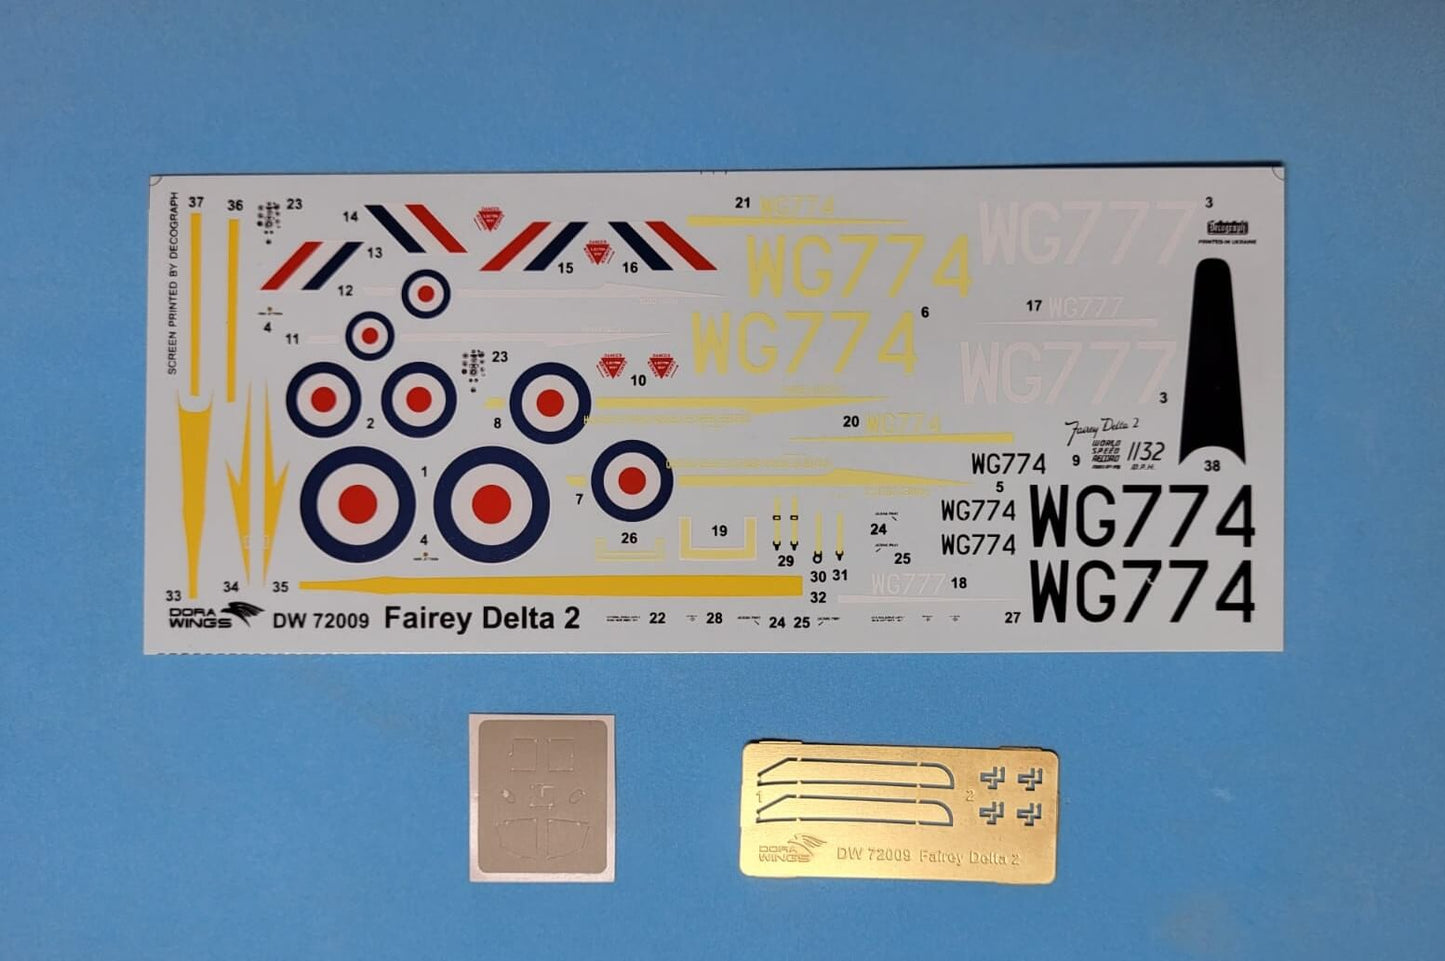 1:72 Fairey Delta 2 British Supersonic Research Aircraft DW72009 Dora Wings